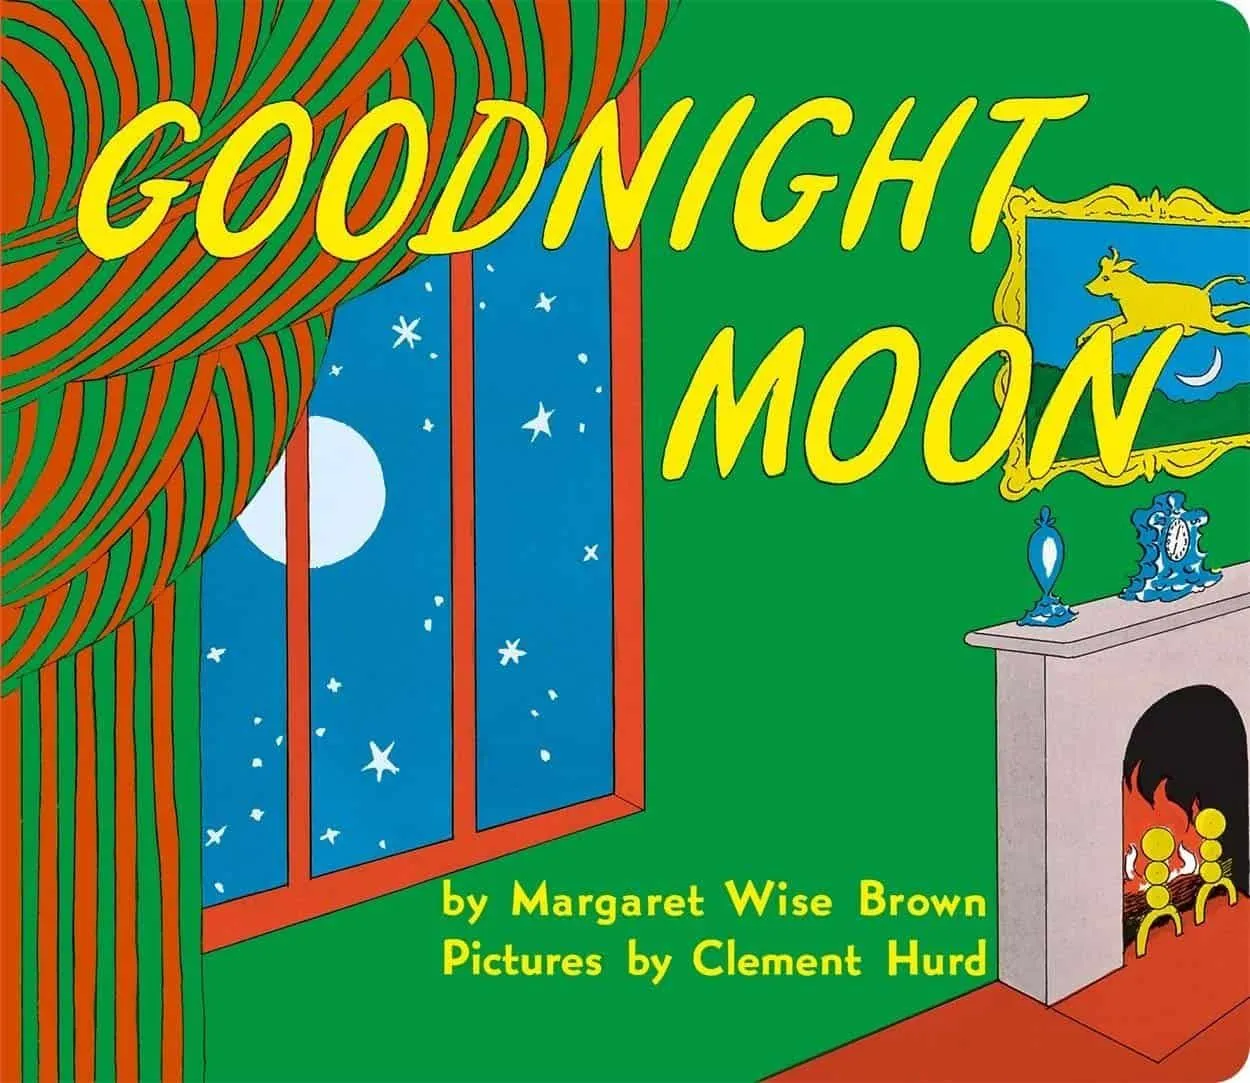 Goodnight Moon by Margaret Wise Brown.